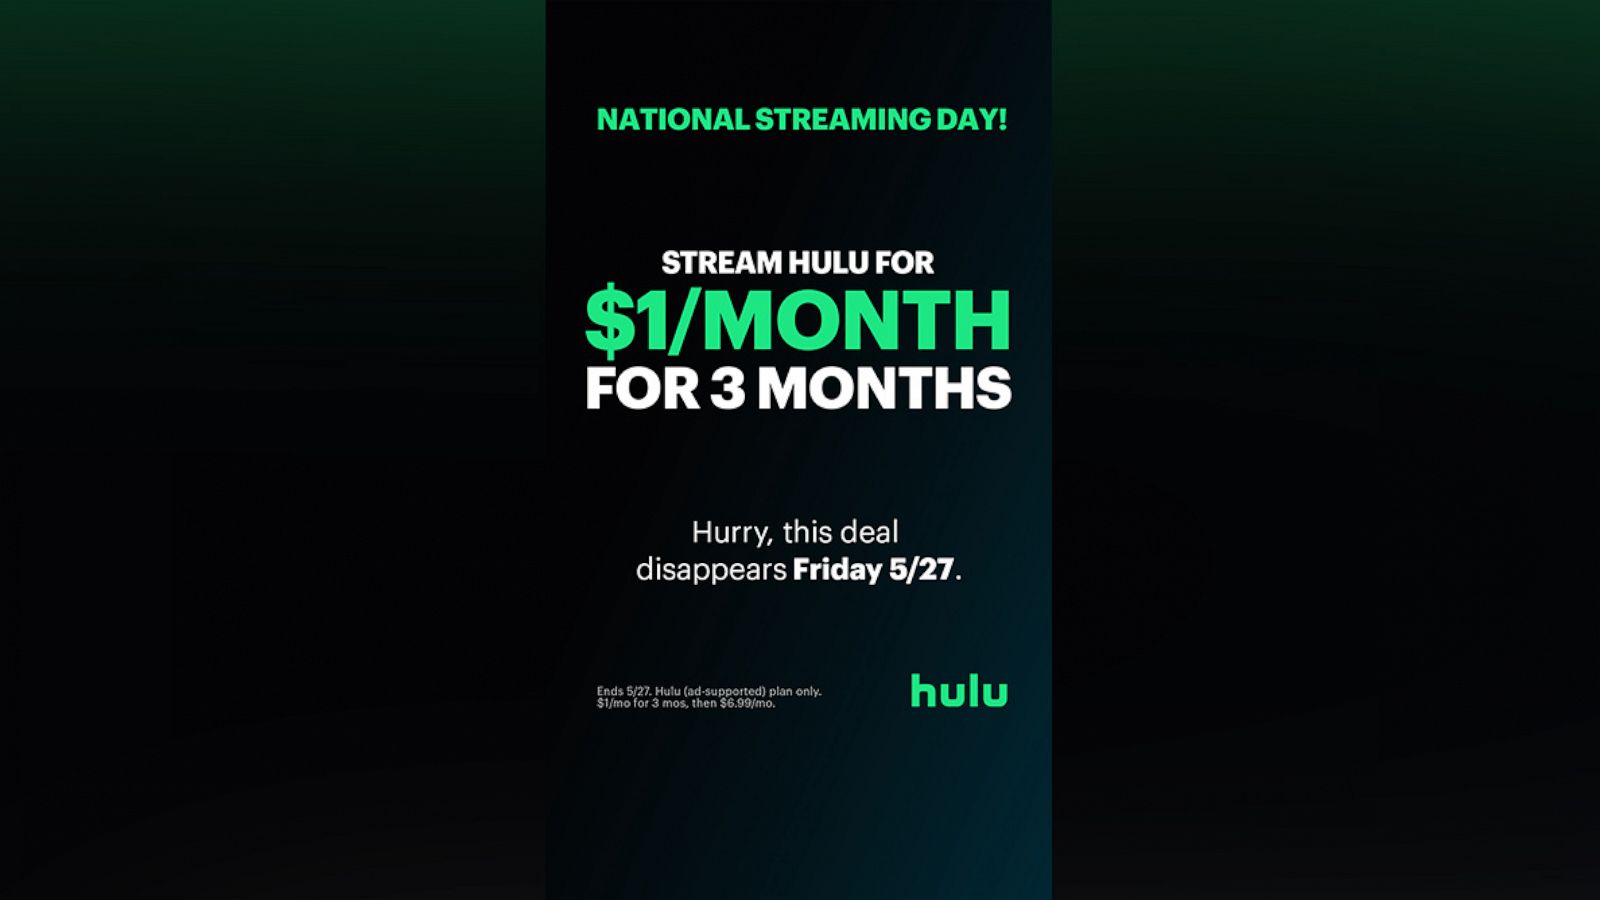 Hulu Offering Limited Time Deal for National Streaming Day